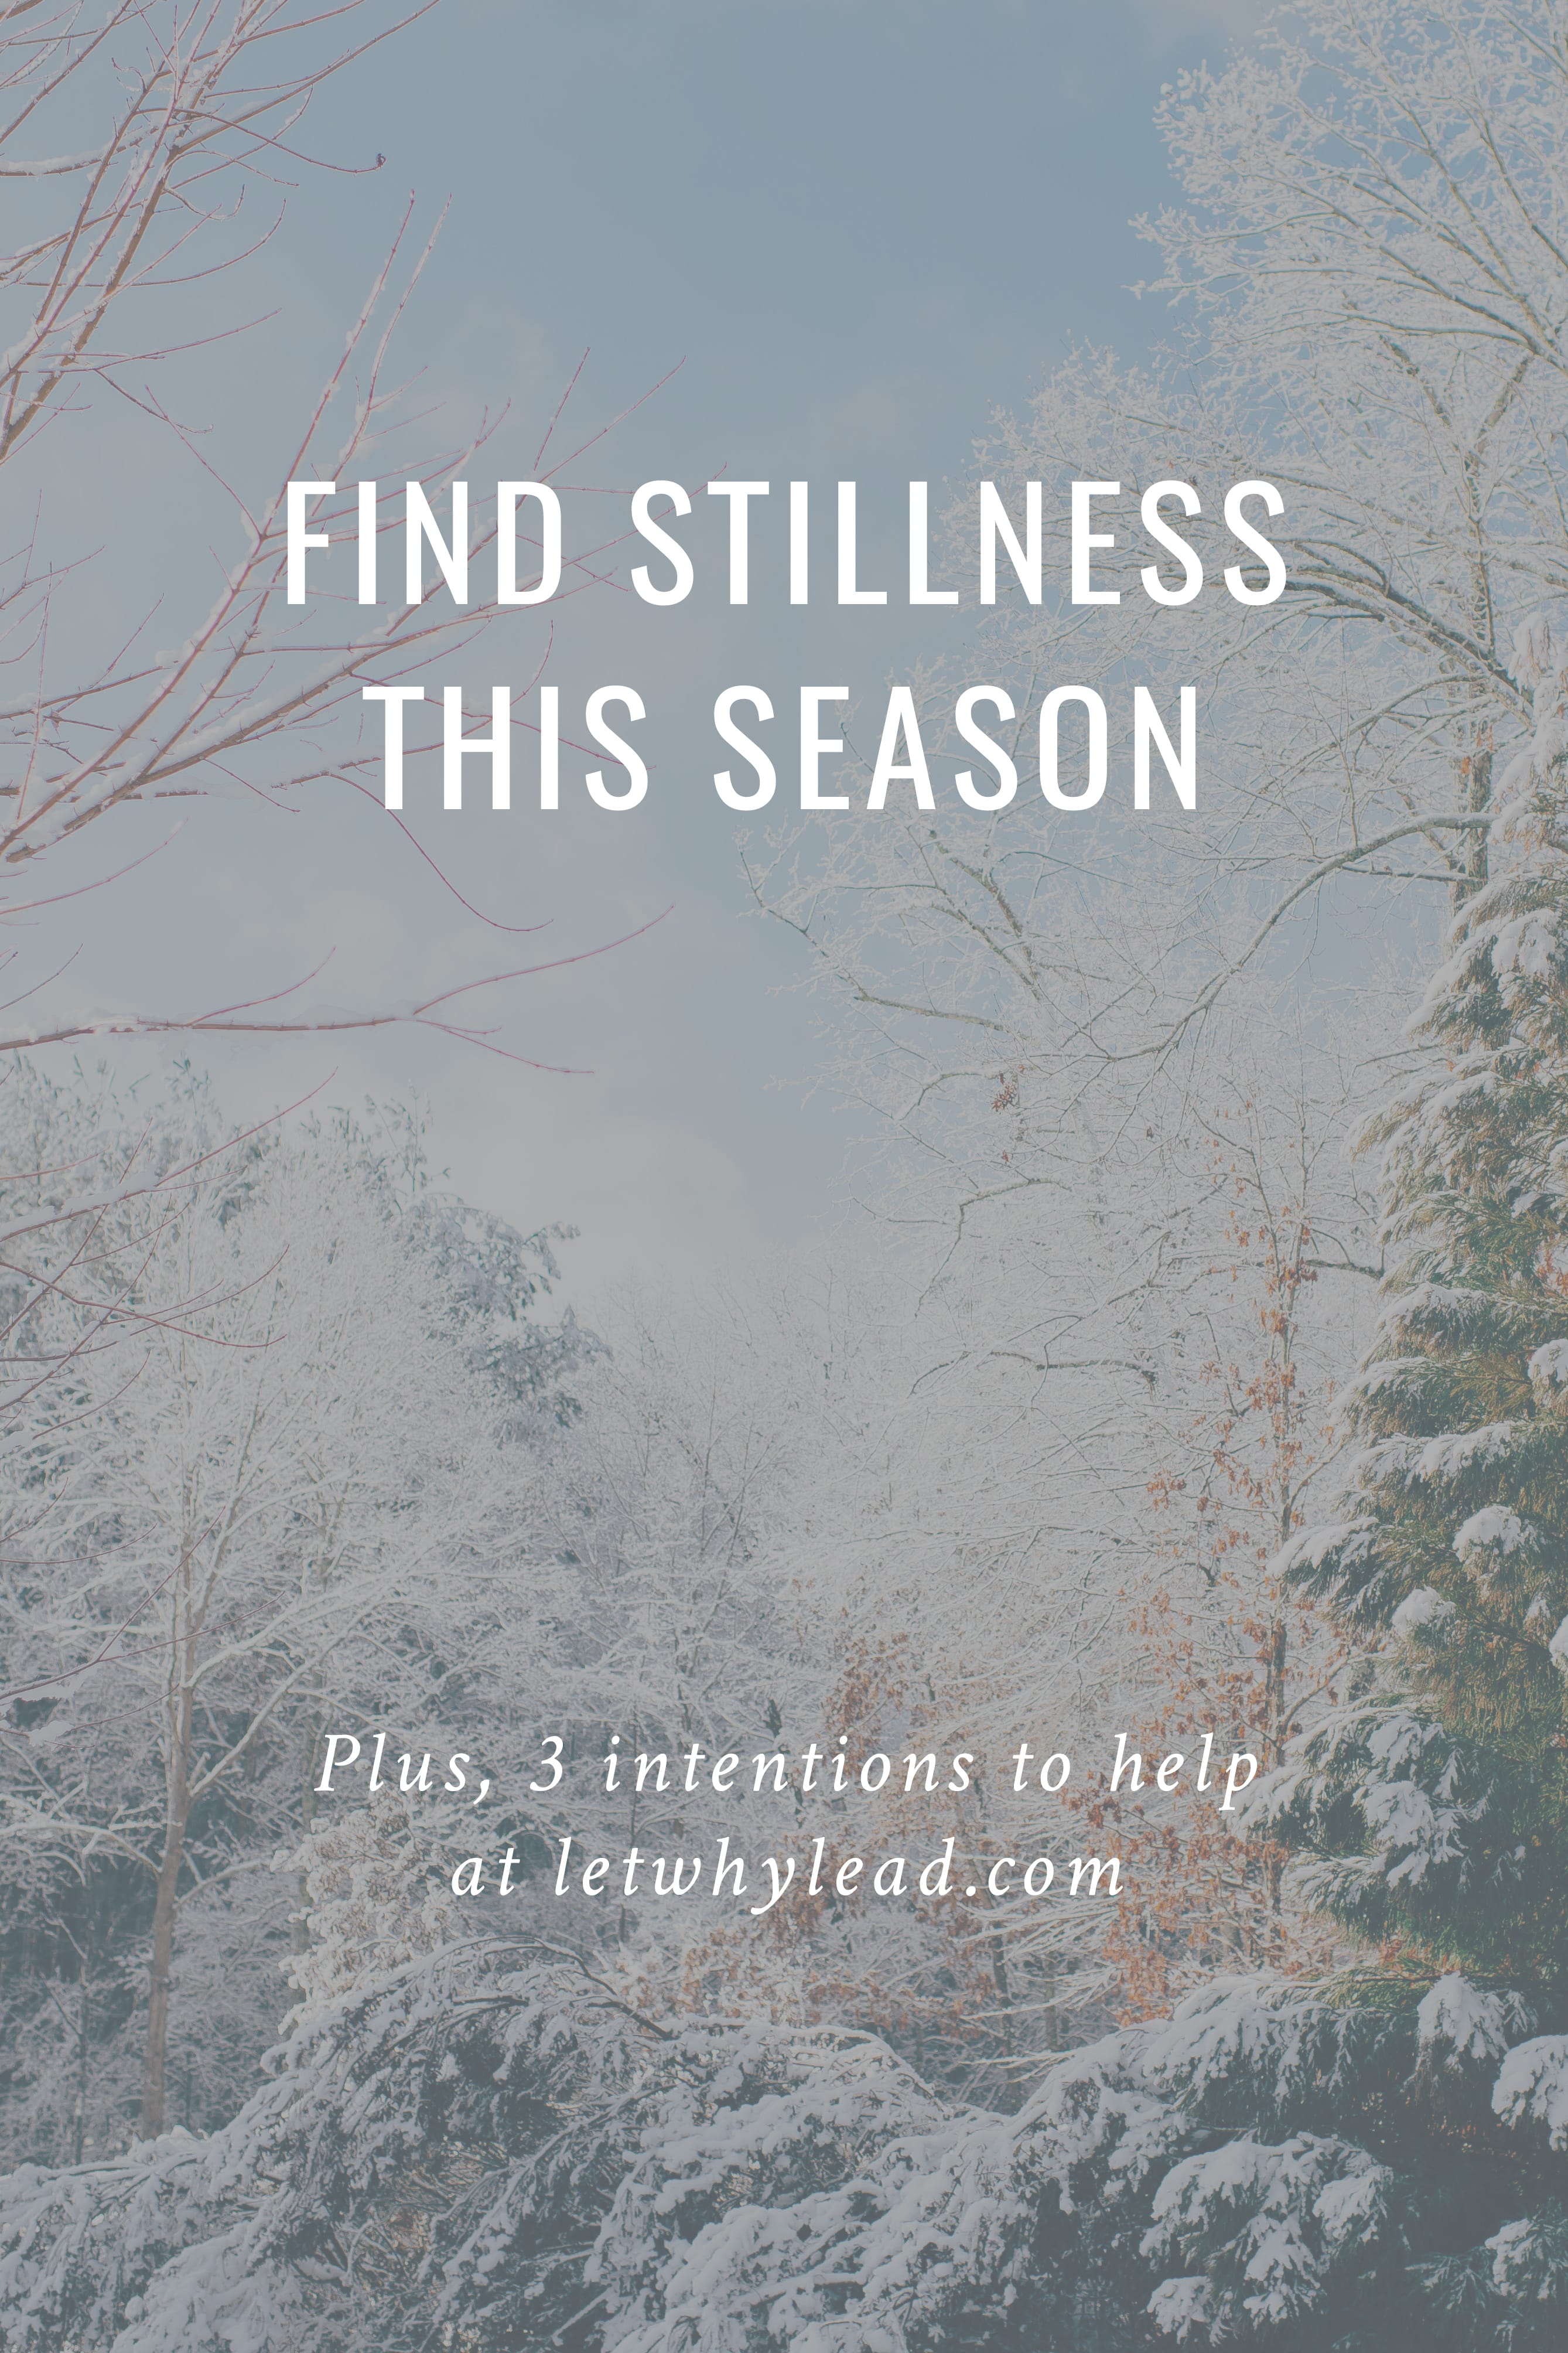 Find Stillness This Holiday Season with These 3 Intentions